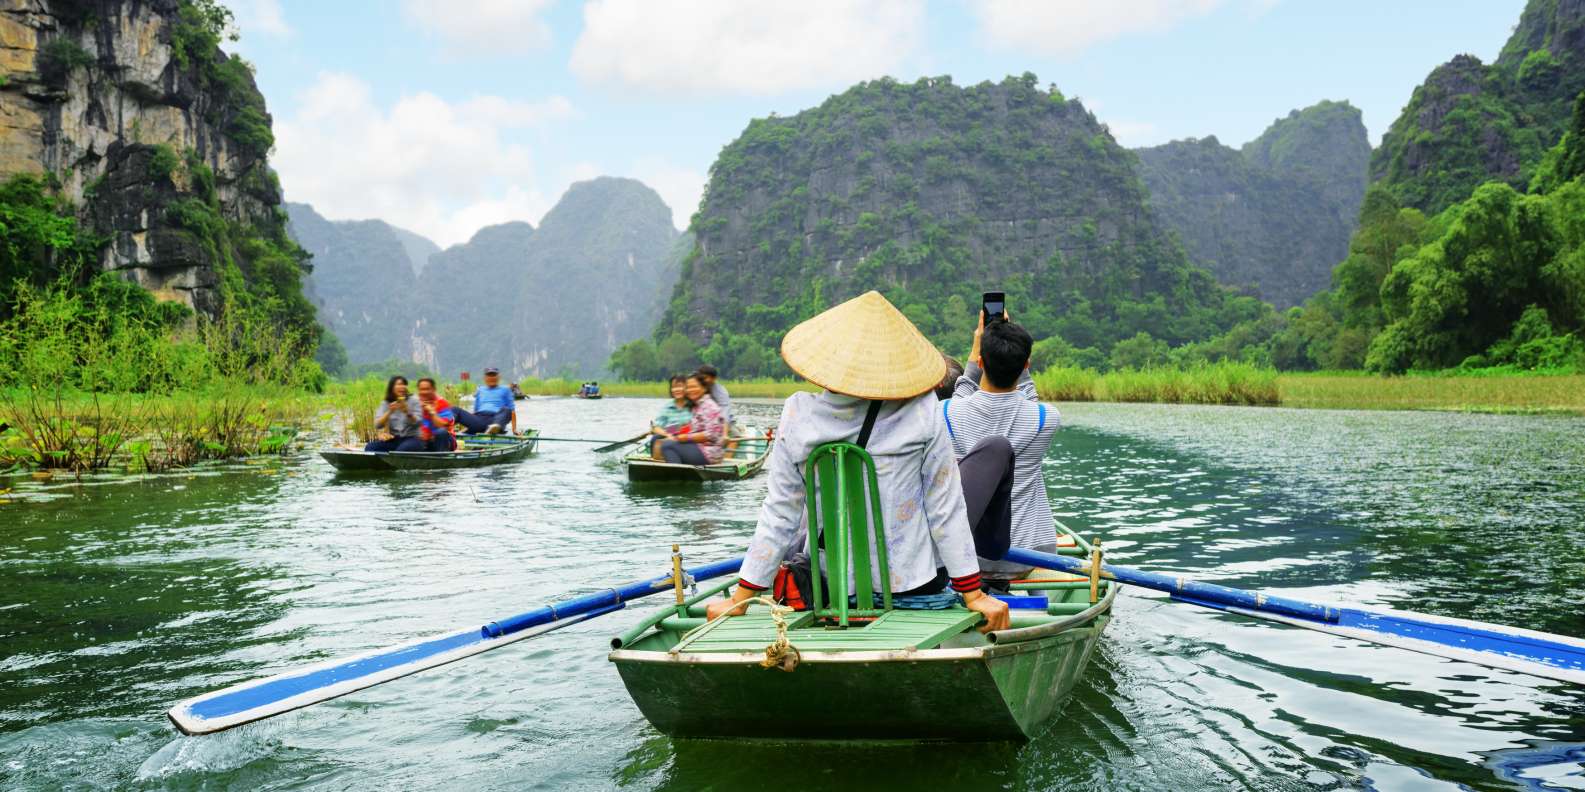 Ever dreamed of a fairytale world, Look no further than Tam Coc Ninh Binh in Vietnam